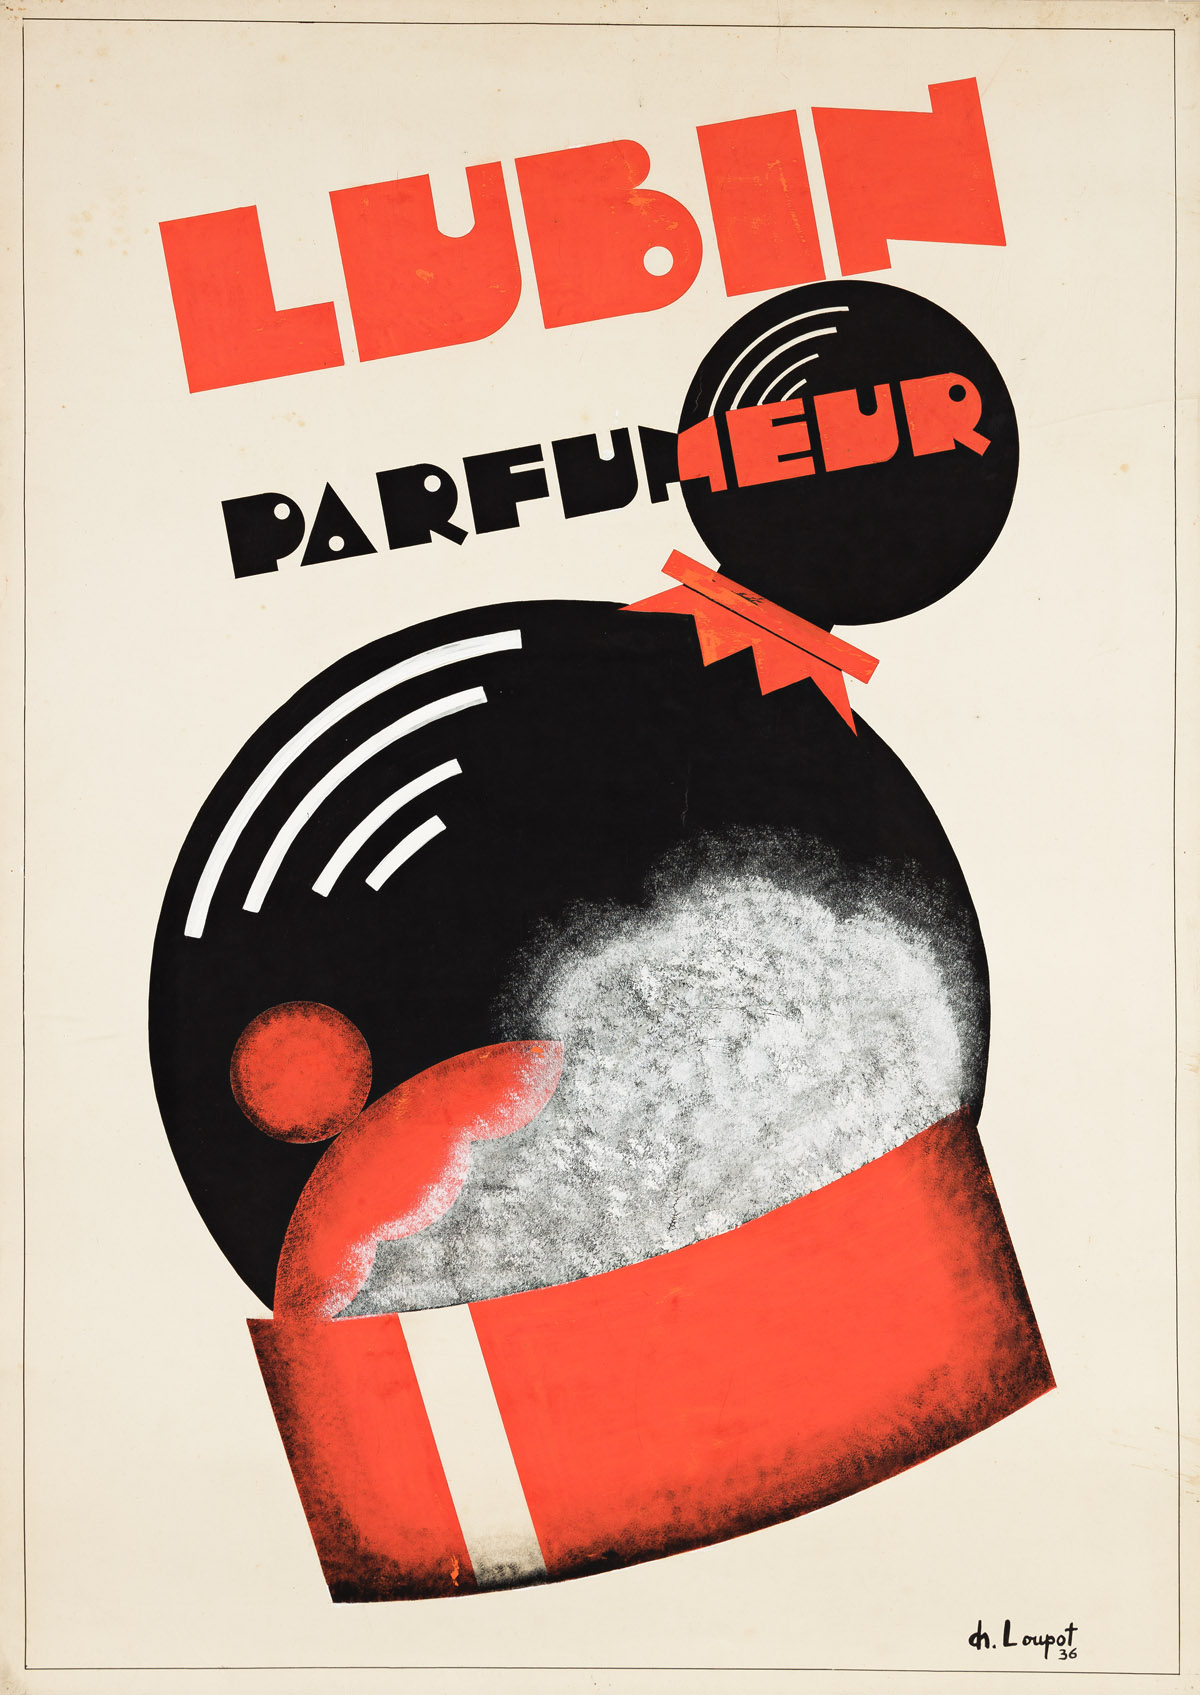 ATTRIBUTED TO CHARLES LOUPOT (1892-1962).  LUBIN PARFUMEUR. Gouache maquette. 1936. 47¼x33½ inches, 120x85 cm.